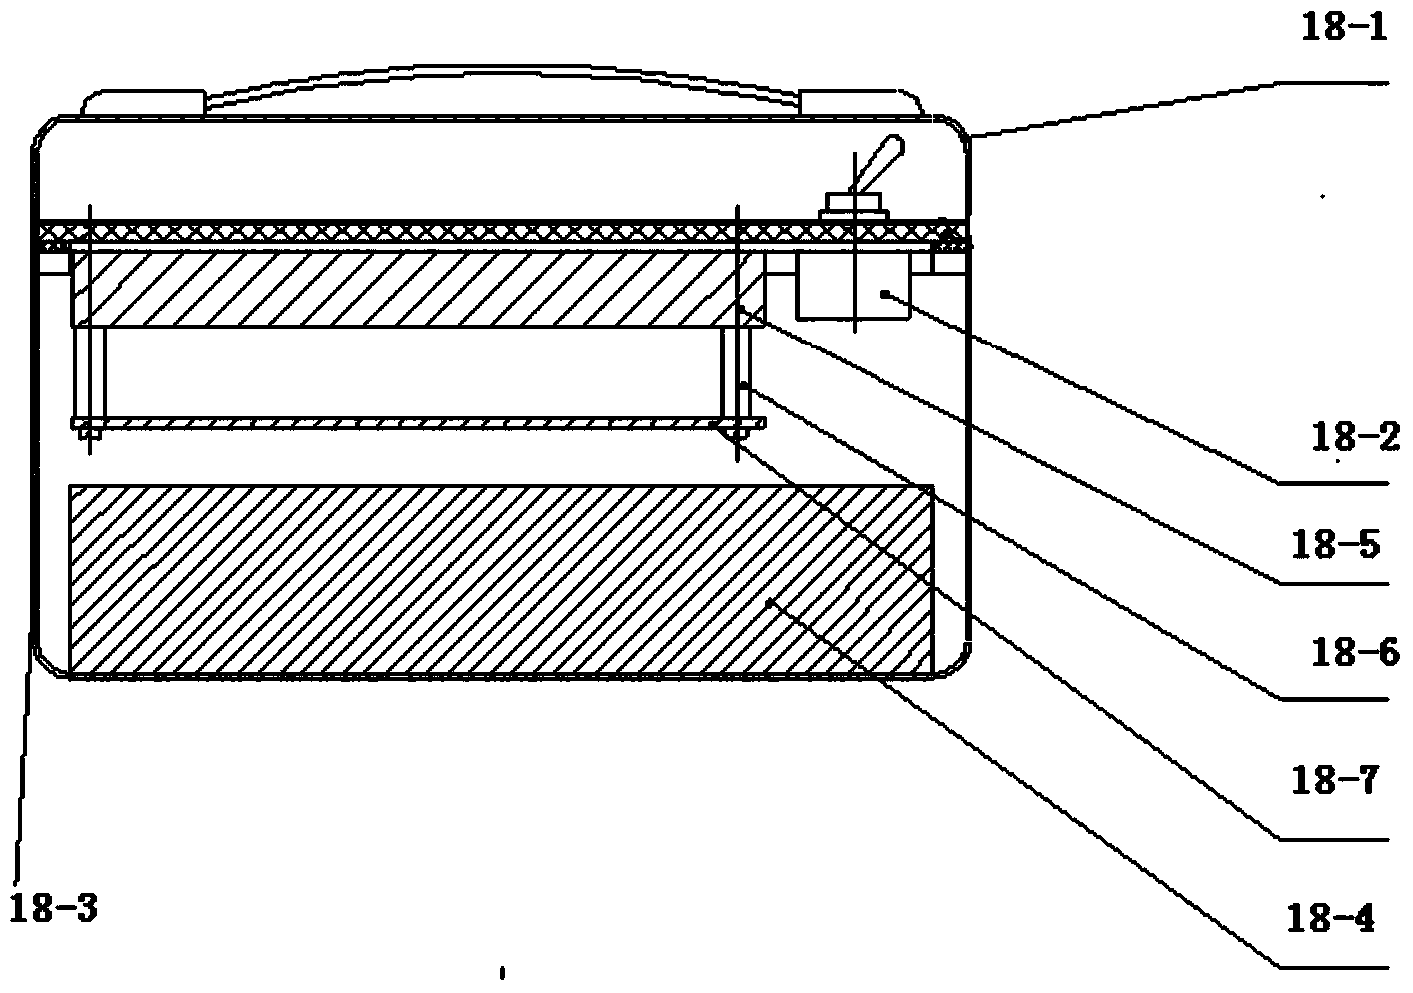 Method for measuring property of anchoring